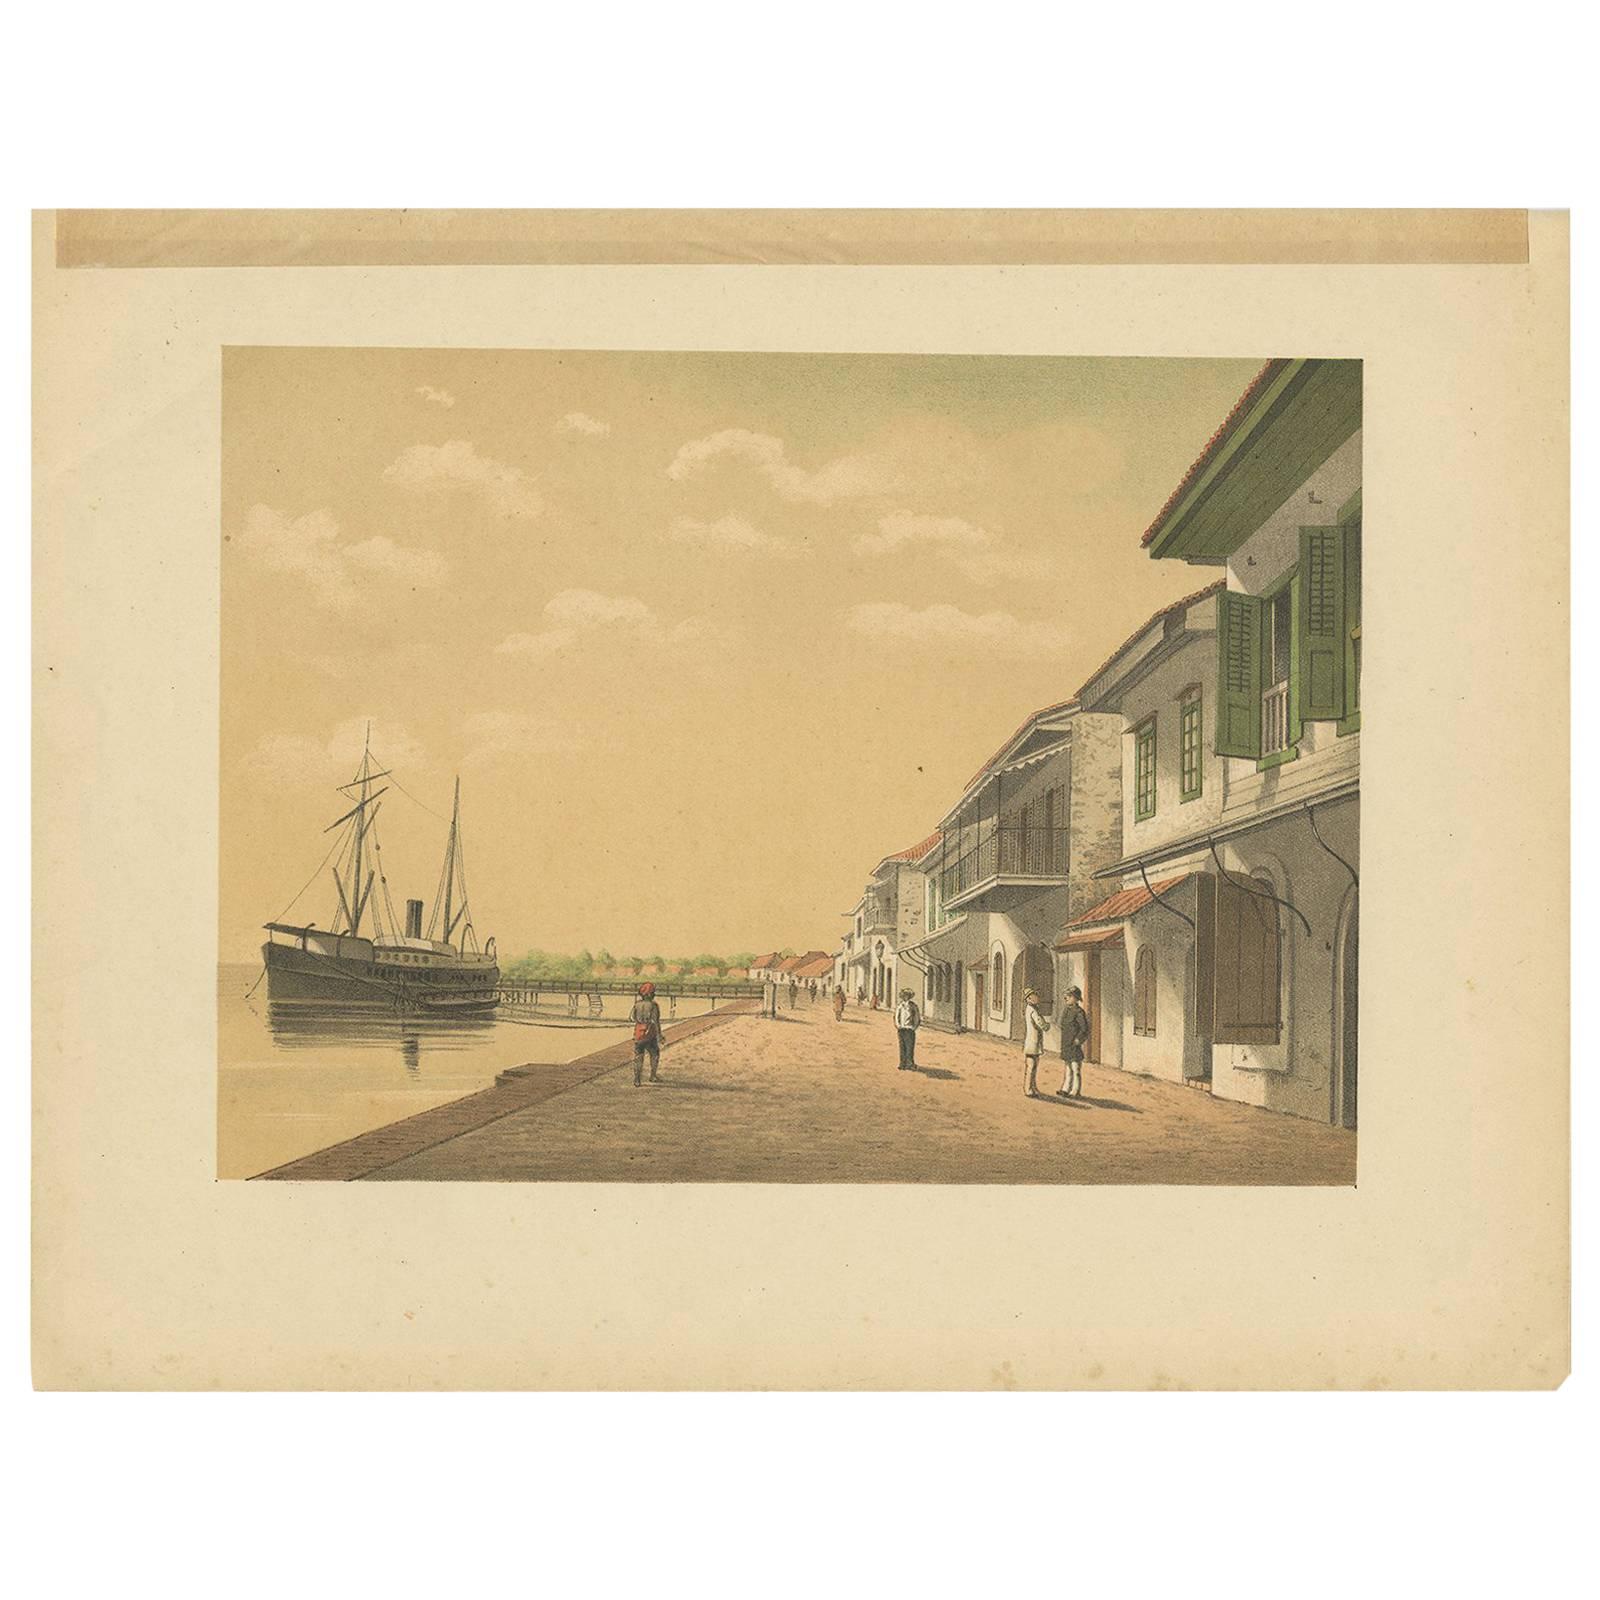 Antique Print of a Steamship at Tanjung Burung by M.T.H. Perelaer, 1888 For Sale